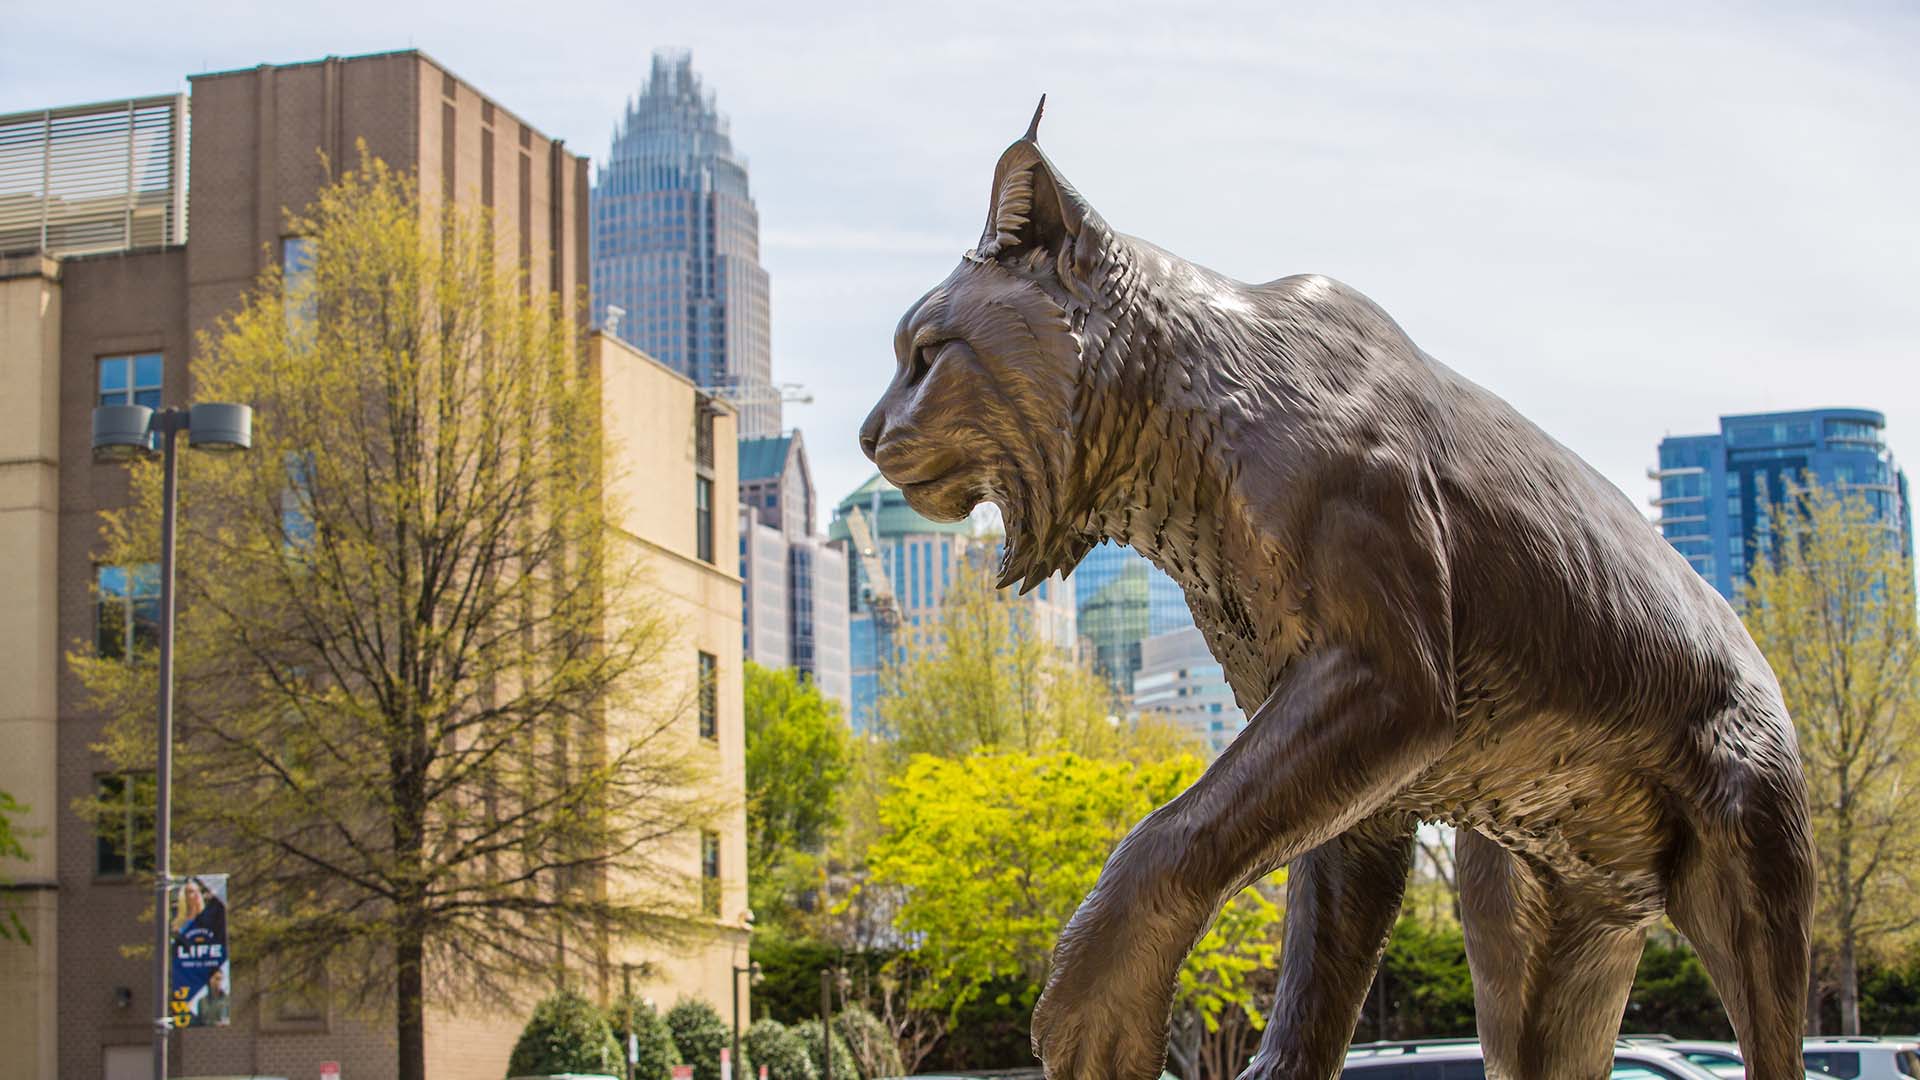 Wildcat statue with the Charlotte city in the background